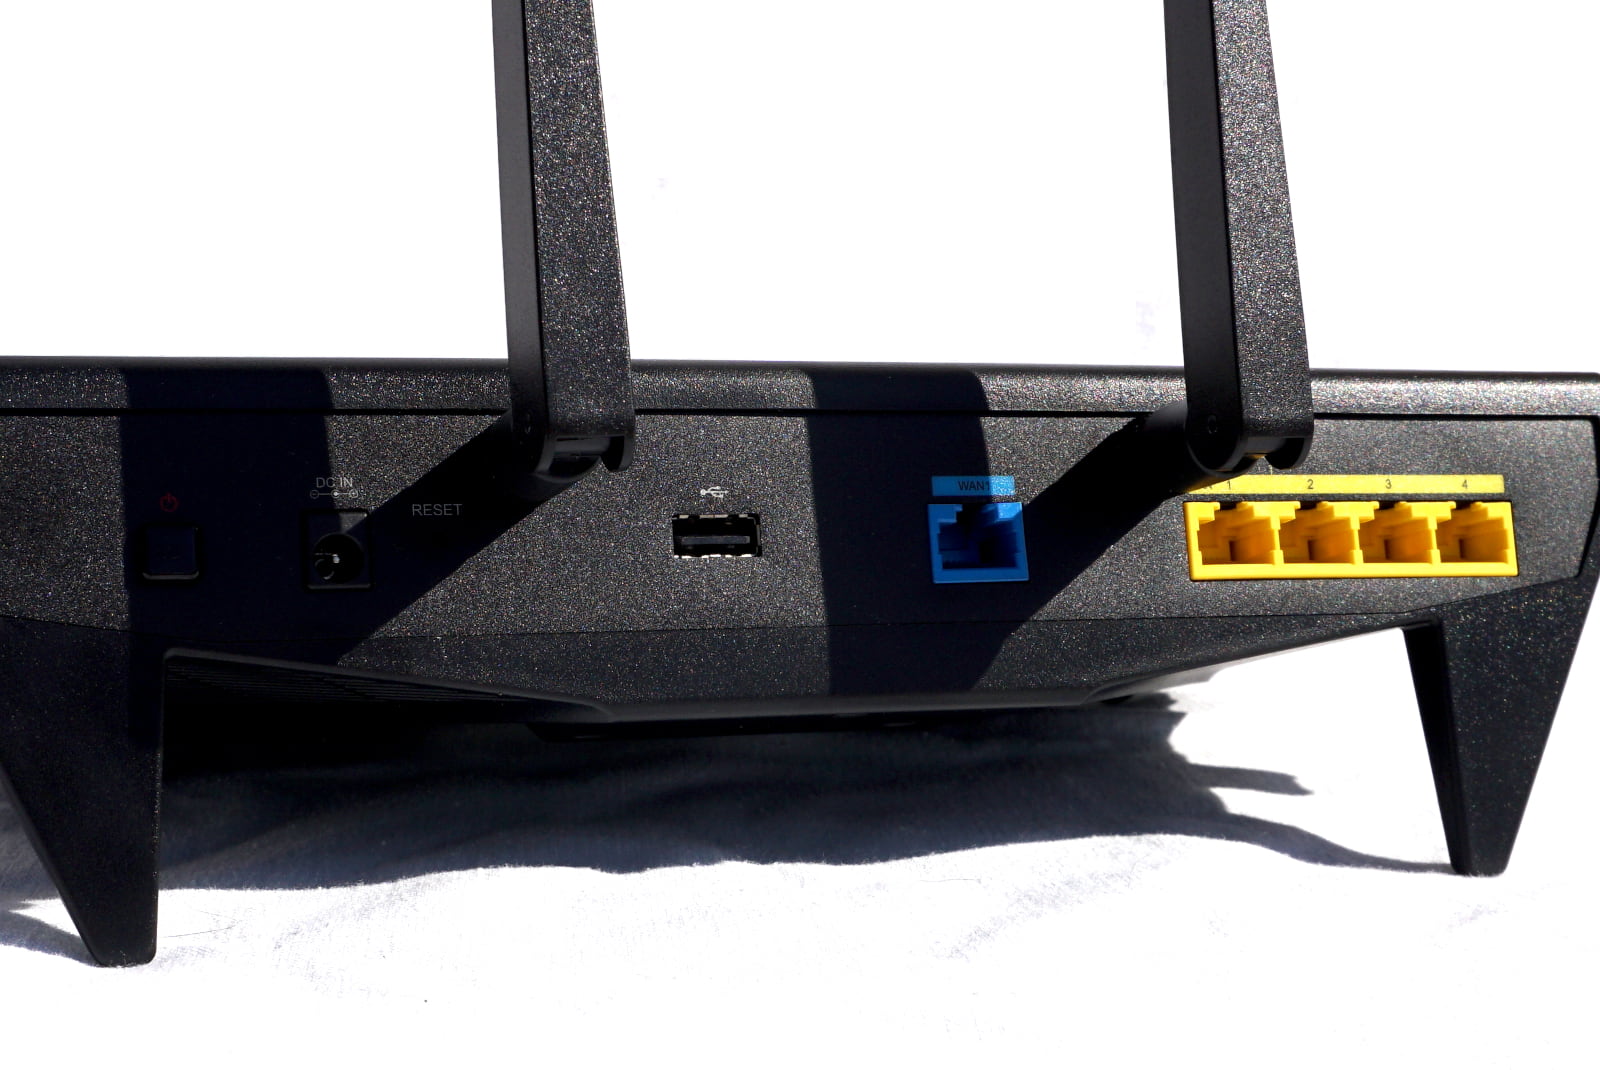 Ports on rear of Synology RT2600ac router